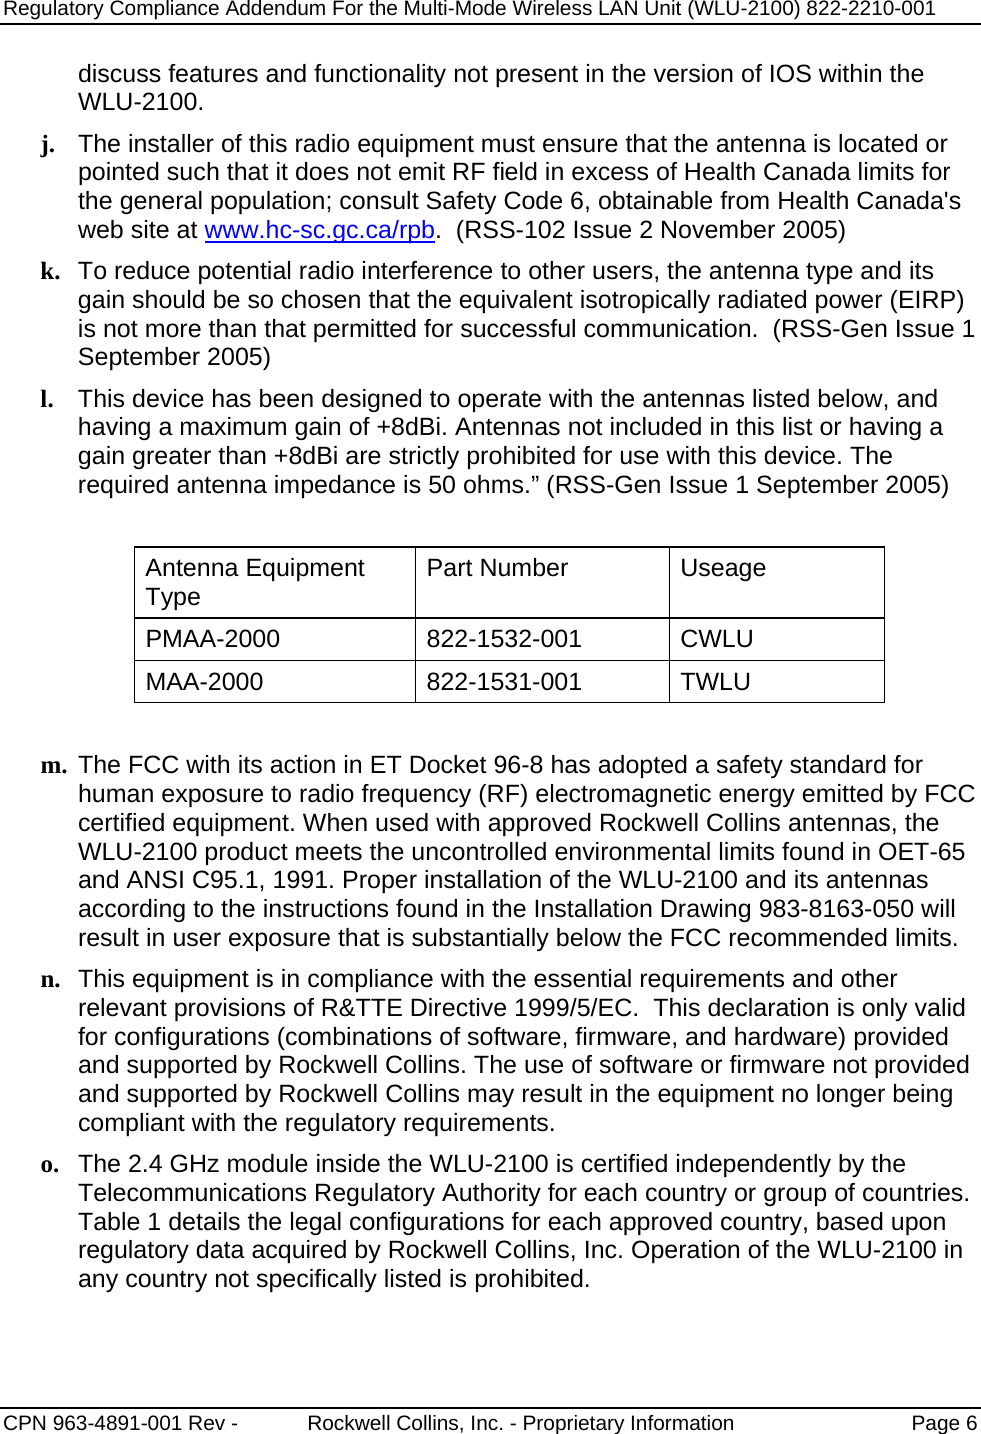 Regulatory Compliance Addendum For the Multi-Mode Wireless LAN Unit (WLU-2100) 822-2210-001   CPN 963-4891-001 Rev -            Rockwell Collins, Inc. - Proprietary Information  Page 6  discuss features and functionality not present in the version of IOS within the WLU-2100. j. The installer of this radio equipment must ensure that the antenna is located or pointed such that it does not emit RF field in excess of Health Canada limits for the general population; consult Safety Code 6, obtainable from Health Canada&apos;s web site at www.hc-sc.gc.ca/rpb.  (RSS-102 Issue 2 November 2005) k. To reduce potential radio interference to other users, the antenna type and its gain should be so chosen that the equivalent isotropically radiated power (EIRP) is not more than that permitted for successful communication.  (RSS-Gen Issue 1 September 2005) l. This device has been designed to operate with the antennas listed below, and having a maximum gain of +8dBi. Antennas not included in this list or having a gain greater than +8dBi are strictly prohibited for use with this device. The required antenna impedance is 50 ohms.” (RSS-Gen Issue 1 September 2005)  Antenna Equipment Type  Part Number  Useage PMAA-2000 822-1532-001 CWLU MAA-2000 822-1531-001 TWLU  m. The FCC with its action in ET Docket 96-8 has adopted a safety standard for human exposure to radio frequency (RF) electromagnetic energy emitted by FCC certified equipment. When used with approved Rockwell Collins antennas, the WLU-2100 product meets the uncontrolled environmental limits found in OET-65 and ANSI C95.1, 1991. Proper installation of the WLU-2100 and its antennas according to the instructions found in the Installation Drawing 983-8163-050 will result in user exposure that is substantially below the FCC recommended limits. n. This equipment is in compliance with the essential requirements and other relevant provisions of R&amp;TTE Directive 1999/5/EC.  This declaration is only valid for configurations (combinations of software, firmware, and hardware) provided and supported by Rockwell Collins. The use of software or firmware not provided and supported by Rockwell Collins may result in the equipment no longer being compliant with the regulatory requirements. o. The 2.4 GHz module inside the WLU-2100 is certified independently by the Telecommunications Regulatory Authority for each country or group of countries.  Table 1 details the legal configurations for each approved country, based upon regulatory data acquired by Rockwell Collins, Inc. Operation of the WLU-2100 in any country not specifically listed is prohibited. 